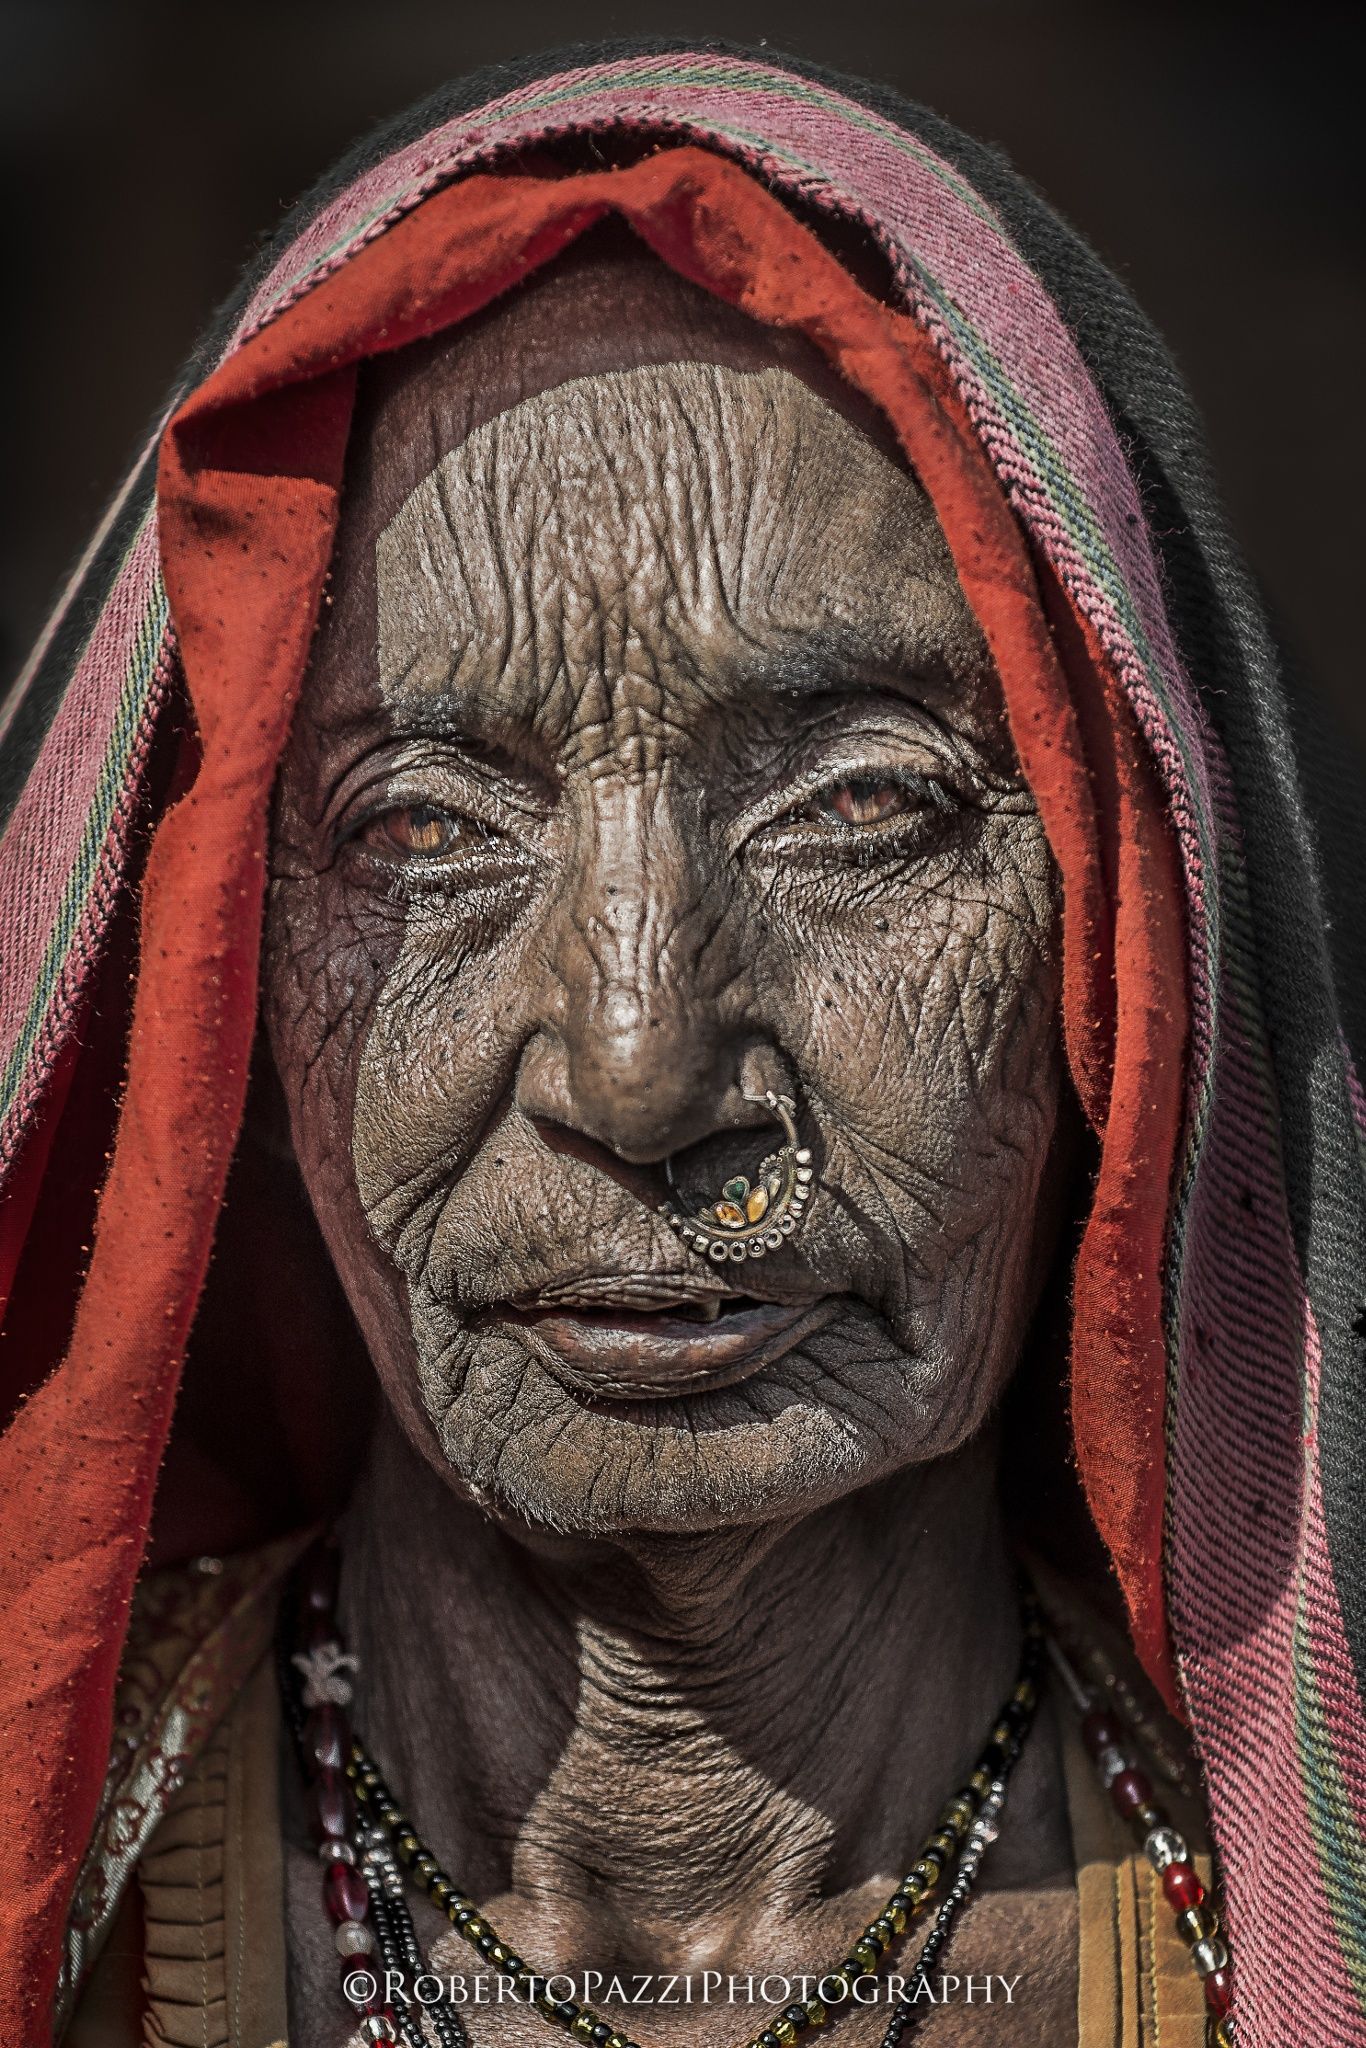 The Old Lady by Roberto Pazzi Photography on 500px